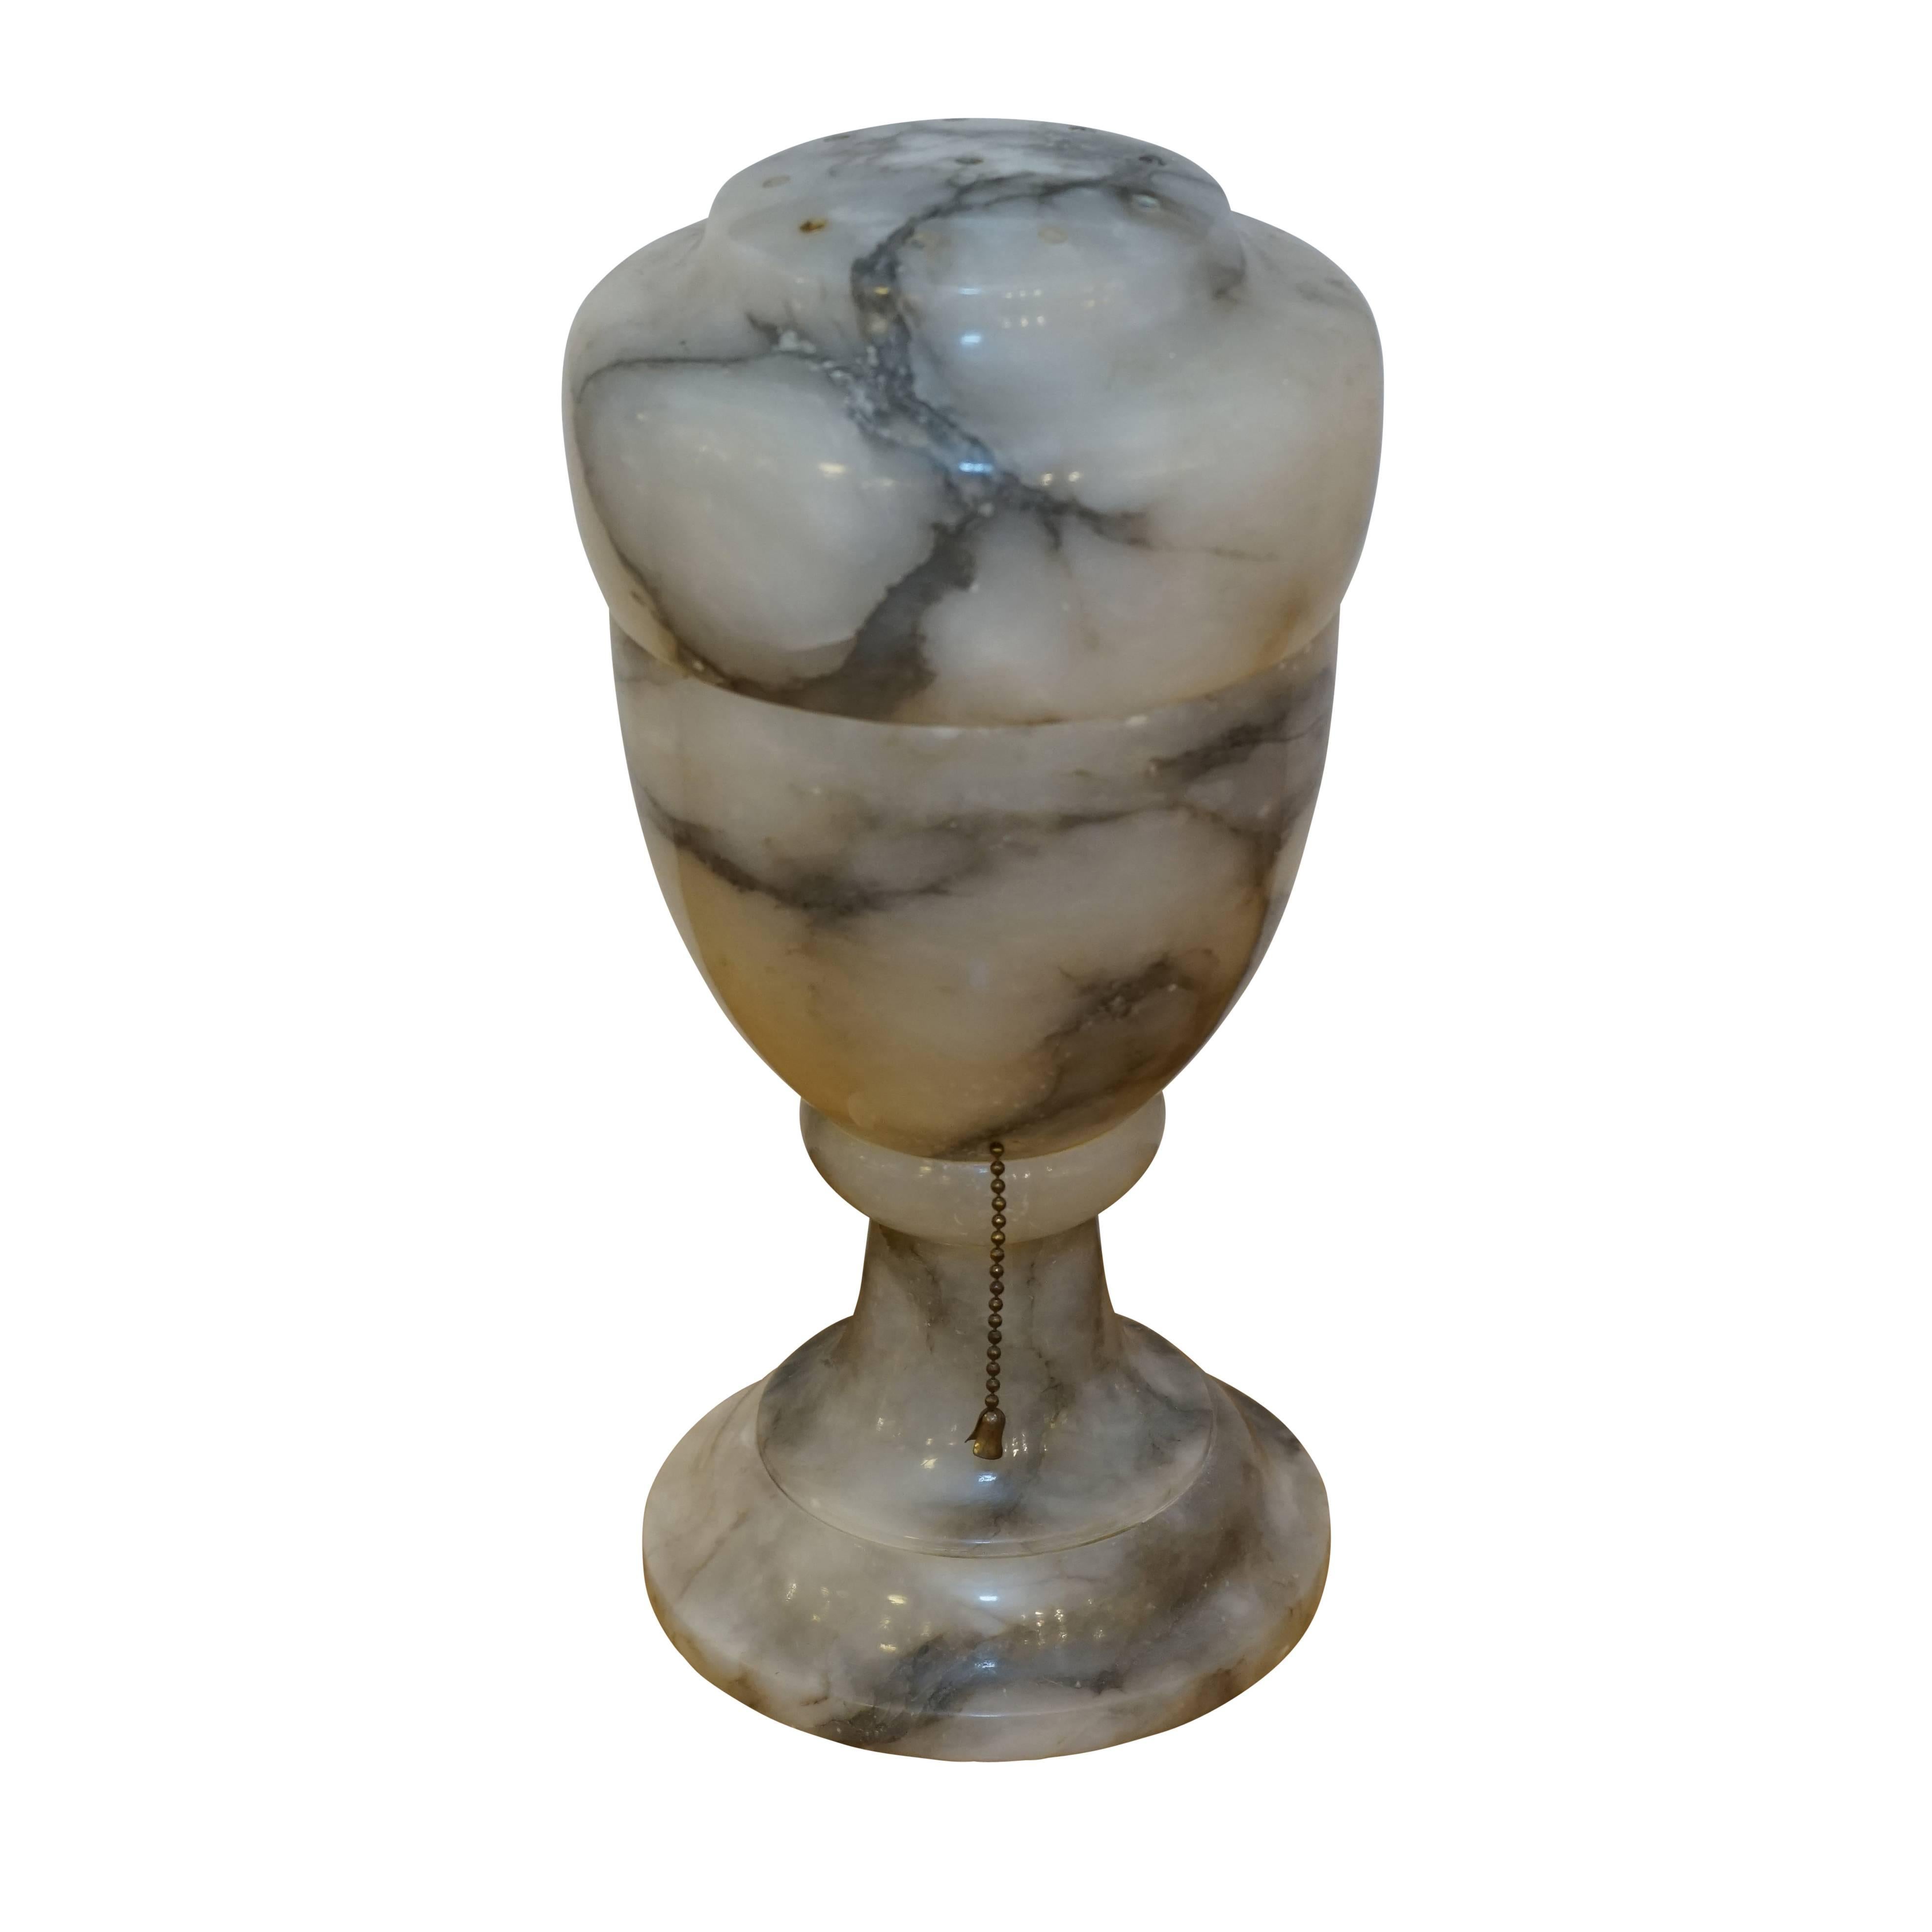 An illuminated urn, this lamp provides soft mood lighting for a dark evening. Tiny ventilation holes on the lid allow the heat of an incandescent bulb to rise and vent. Alternately, a cool LED bulb is also suggested for even brighter light!